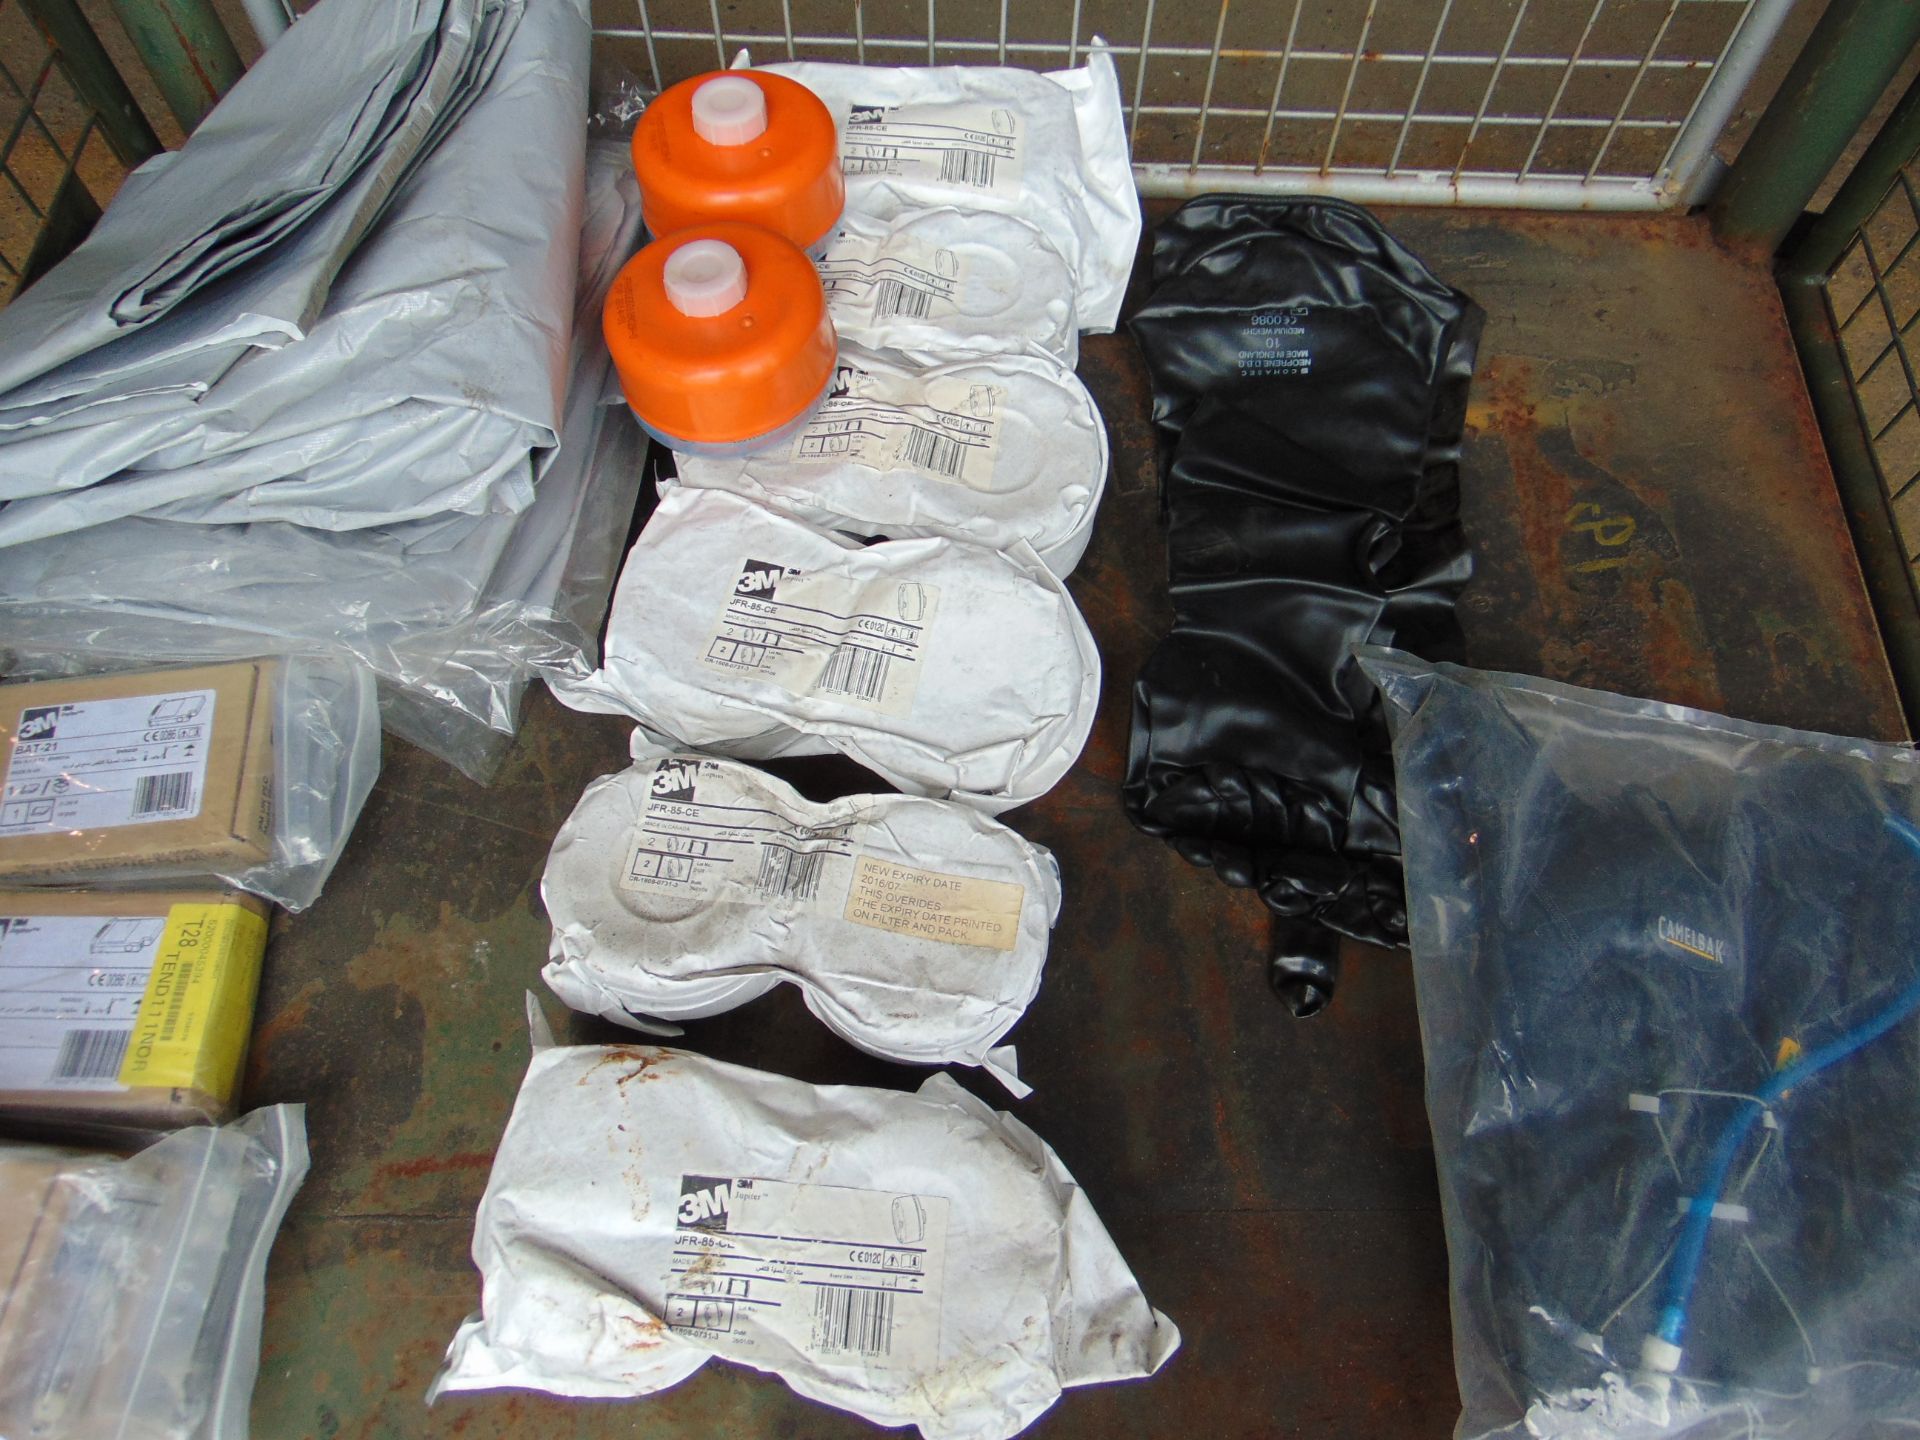 Stillage of 3M Filter Cartridges, Plastic Sheets, Camelback Personal Hydrator, HD Rubber Gloves etc. - Image 4 of 5